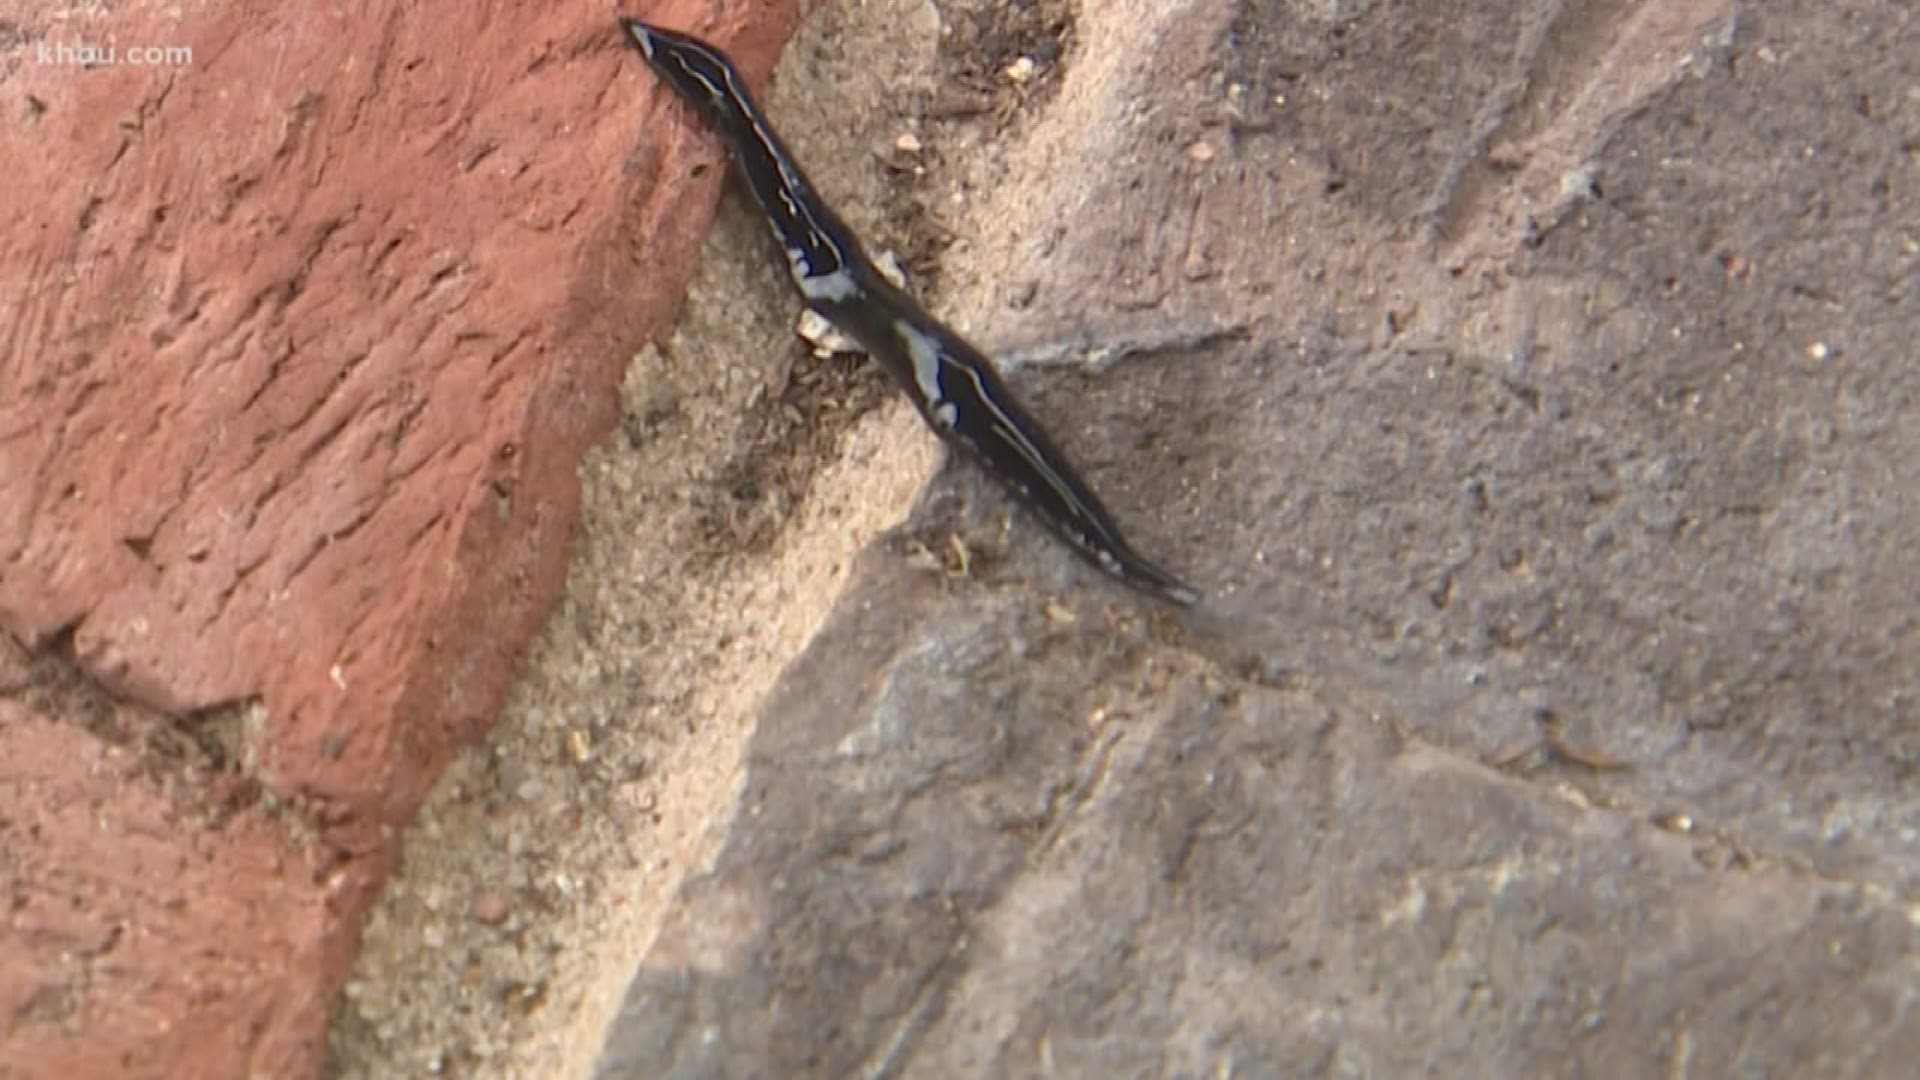 A Pearland woman is warning others of a potentially dangerous worm she discovered in her backyard.